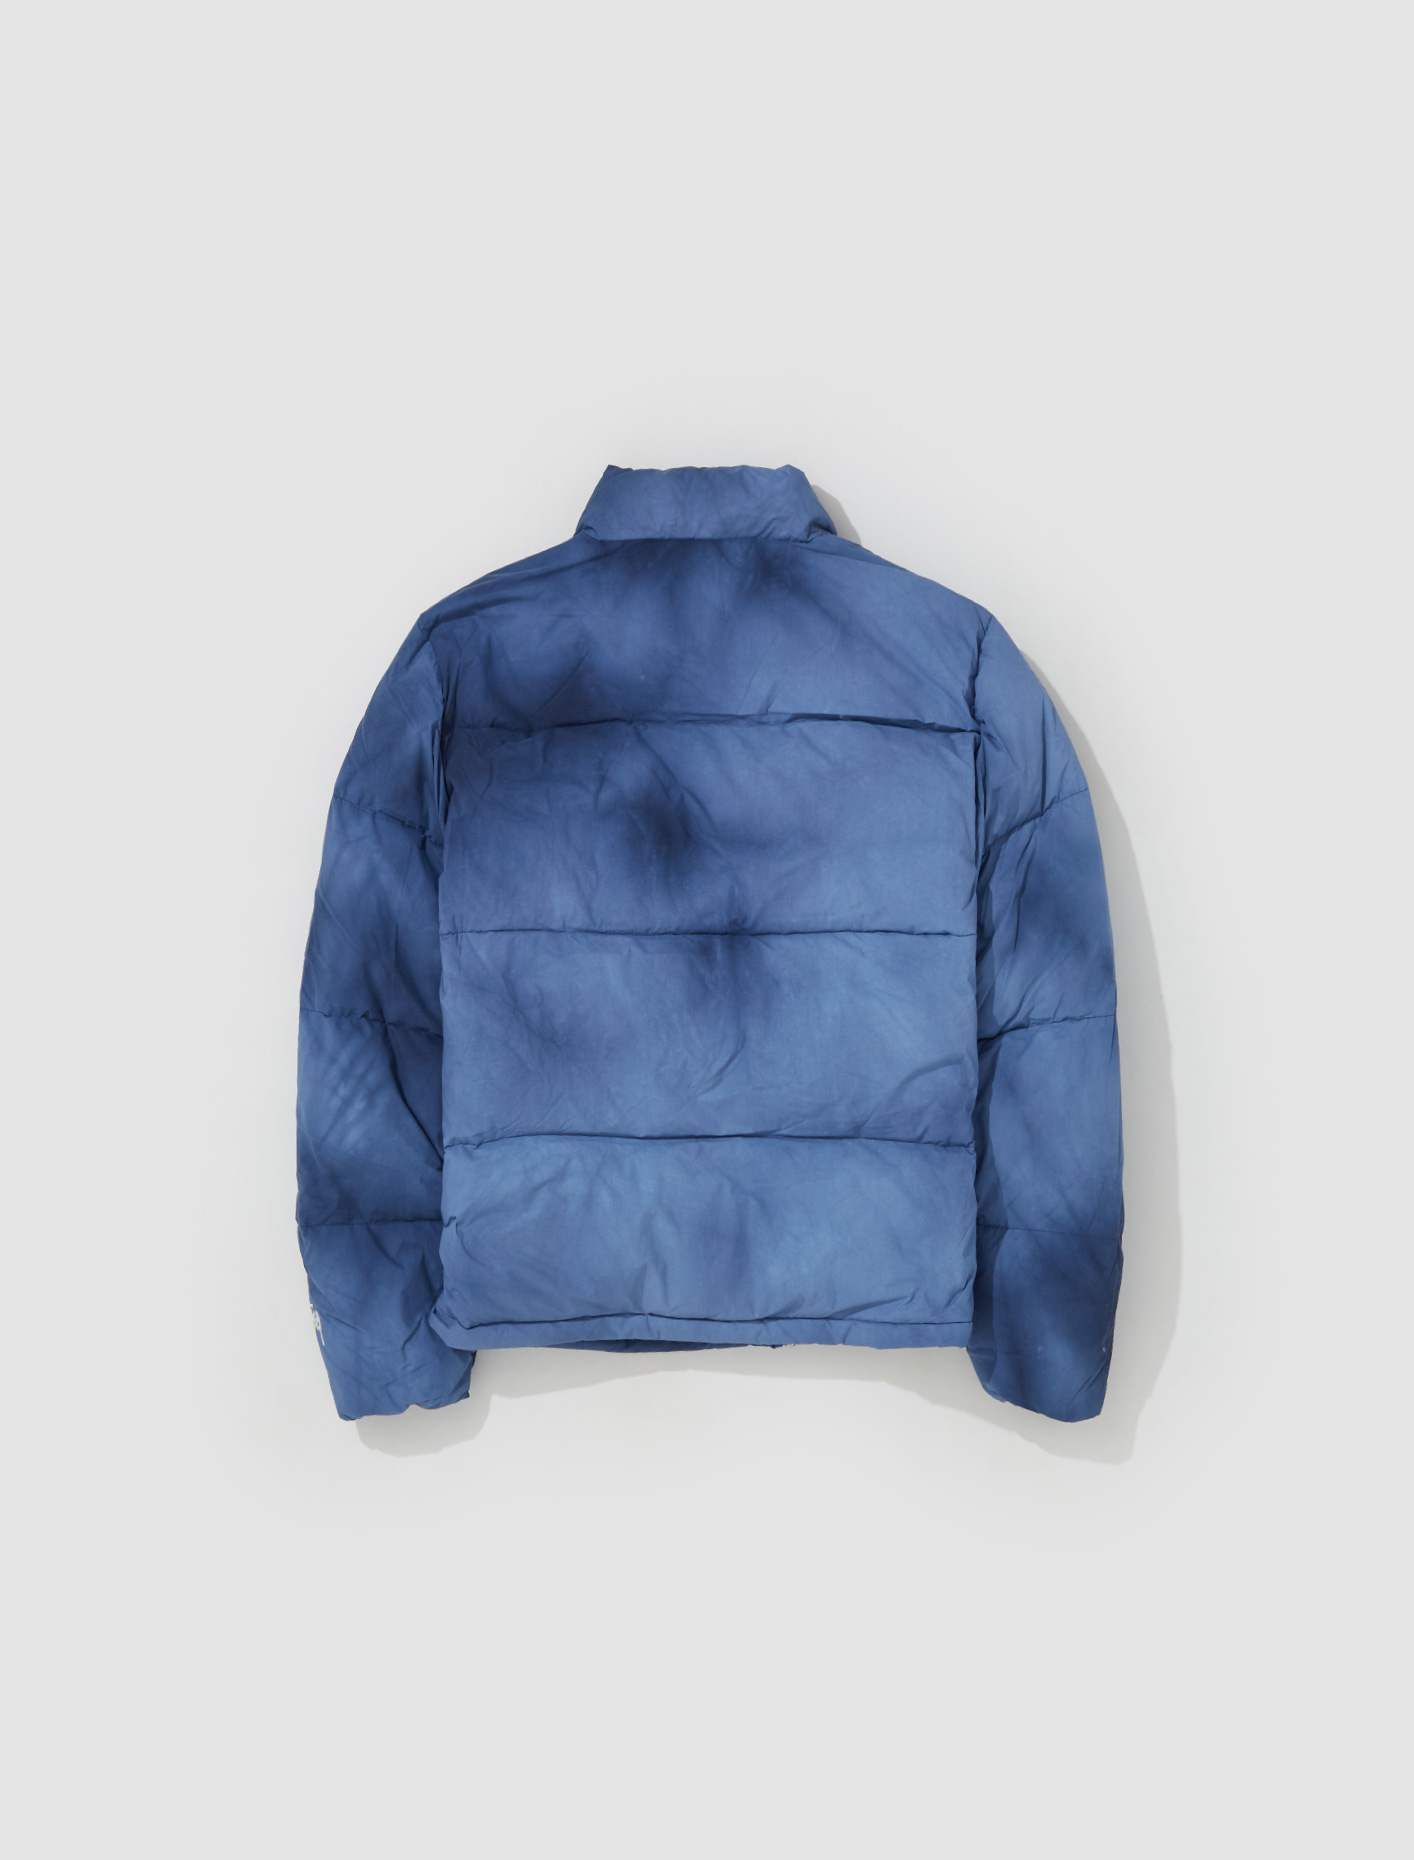 Stüssy Recycled Nylon Down Puffer Jacket in Washed Navy | Voo Store Berlin  | Worldwide Shipping